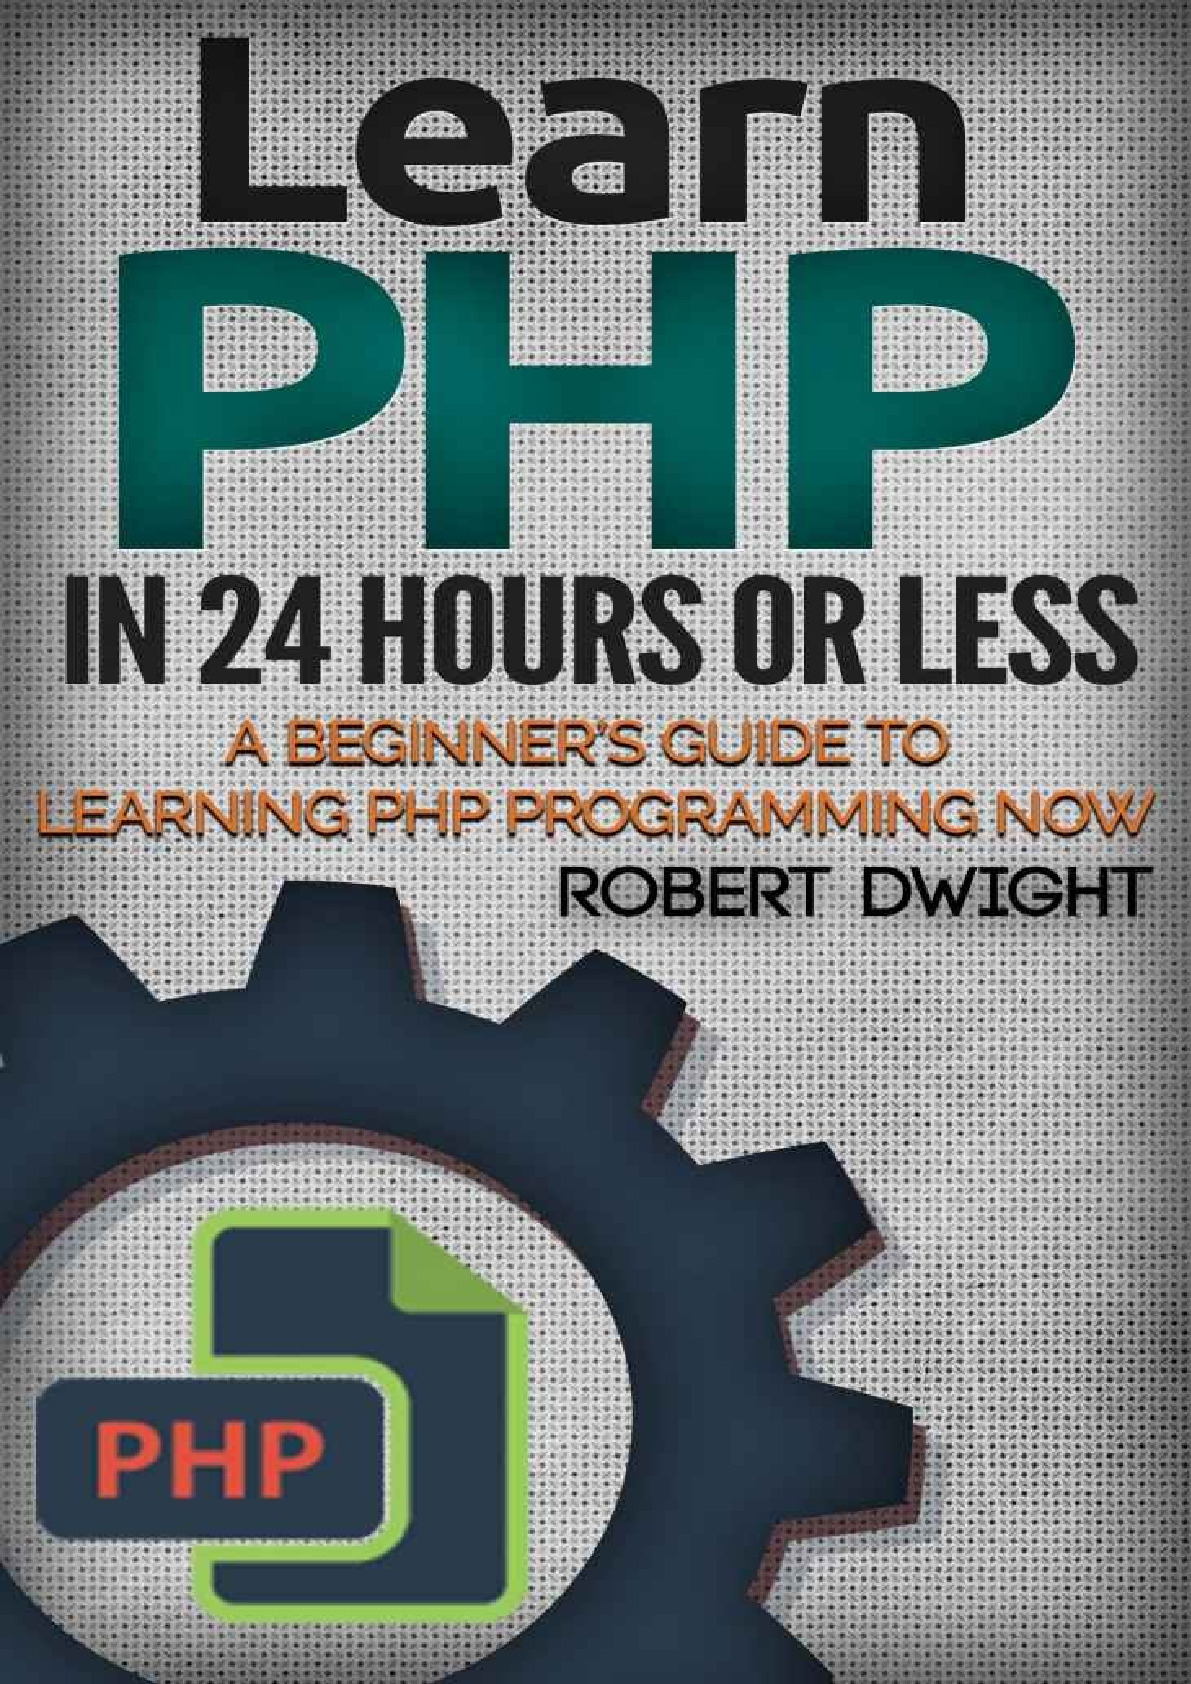 PHP_ Learn PHP in 24 Hours or Less – A Beginner’s Guide To Learning PHP Programming Now